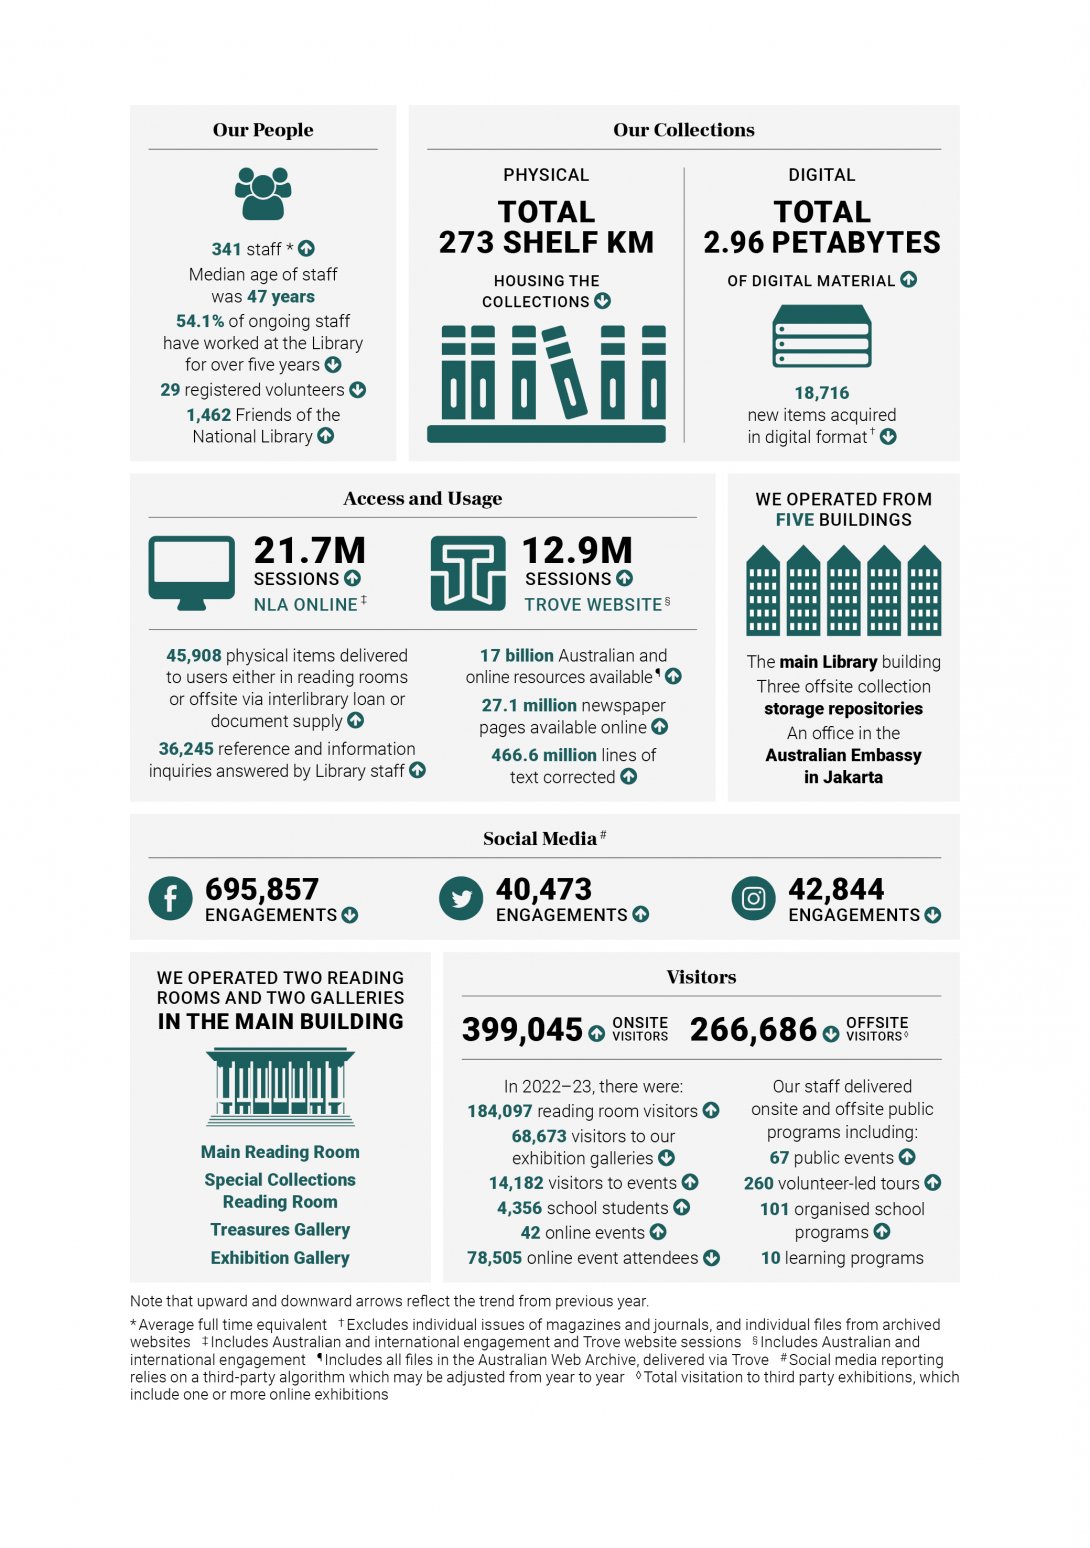 Graphic symbols and statistics about the Library's people, collections, buildings, access and usage, social media, and visitor numbers